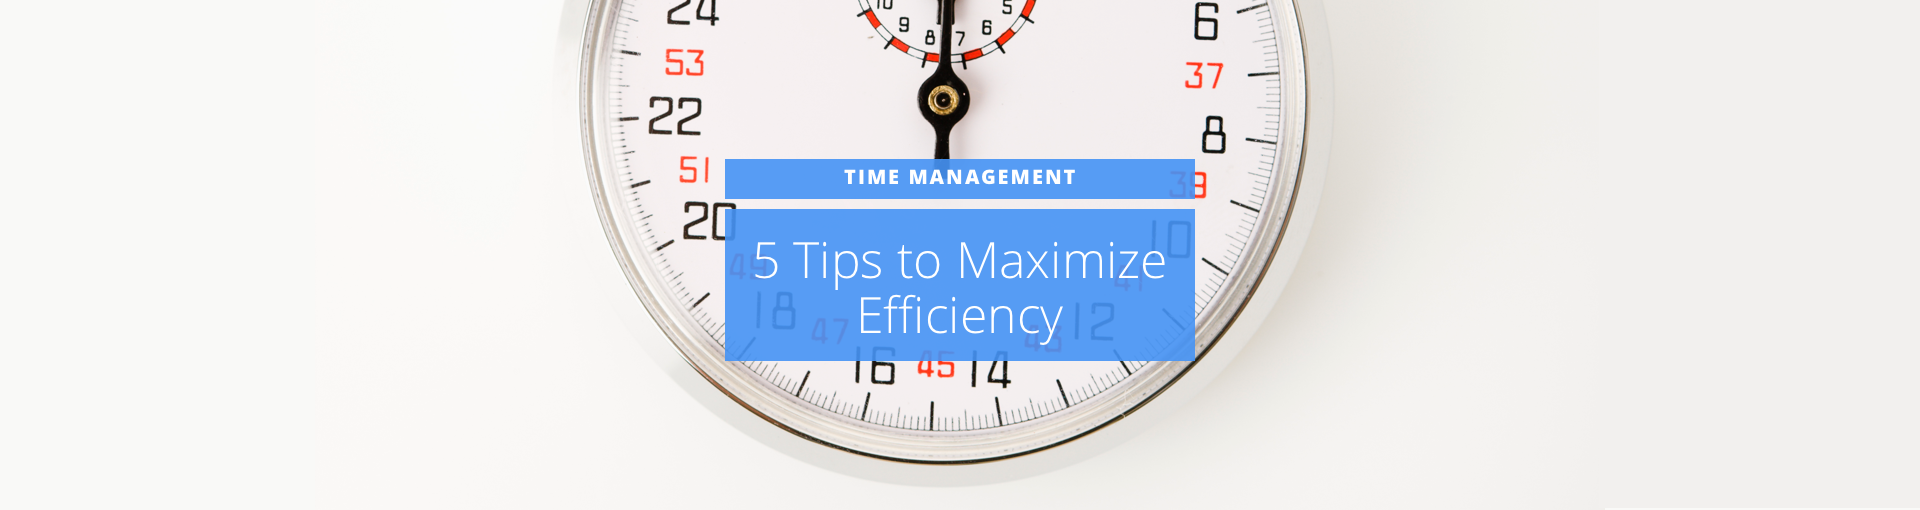 Time Management: 5 Tips to Maximize Efficiency Featured Image